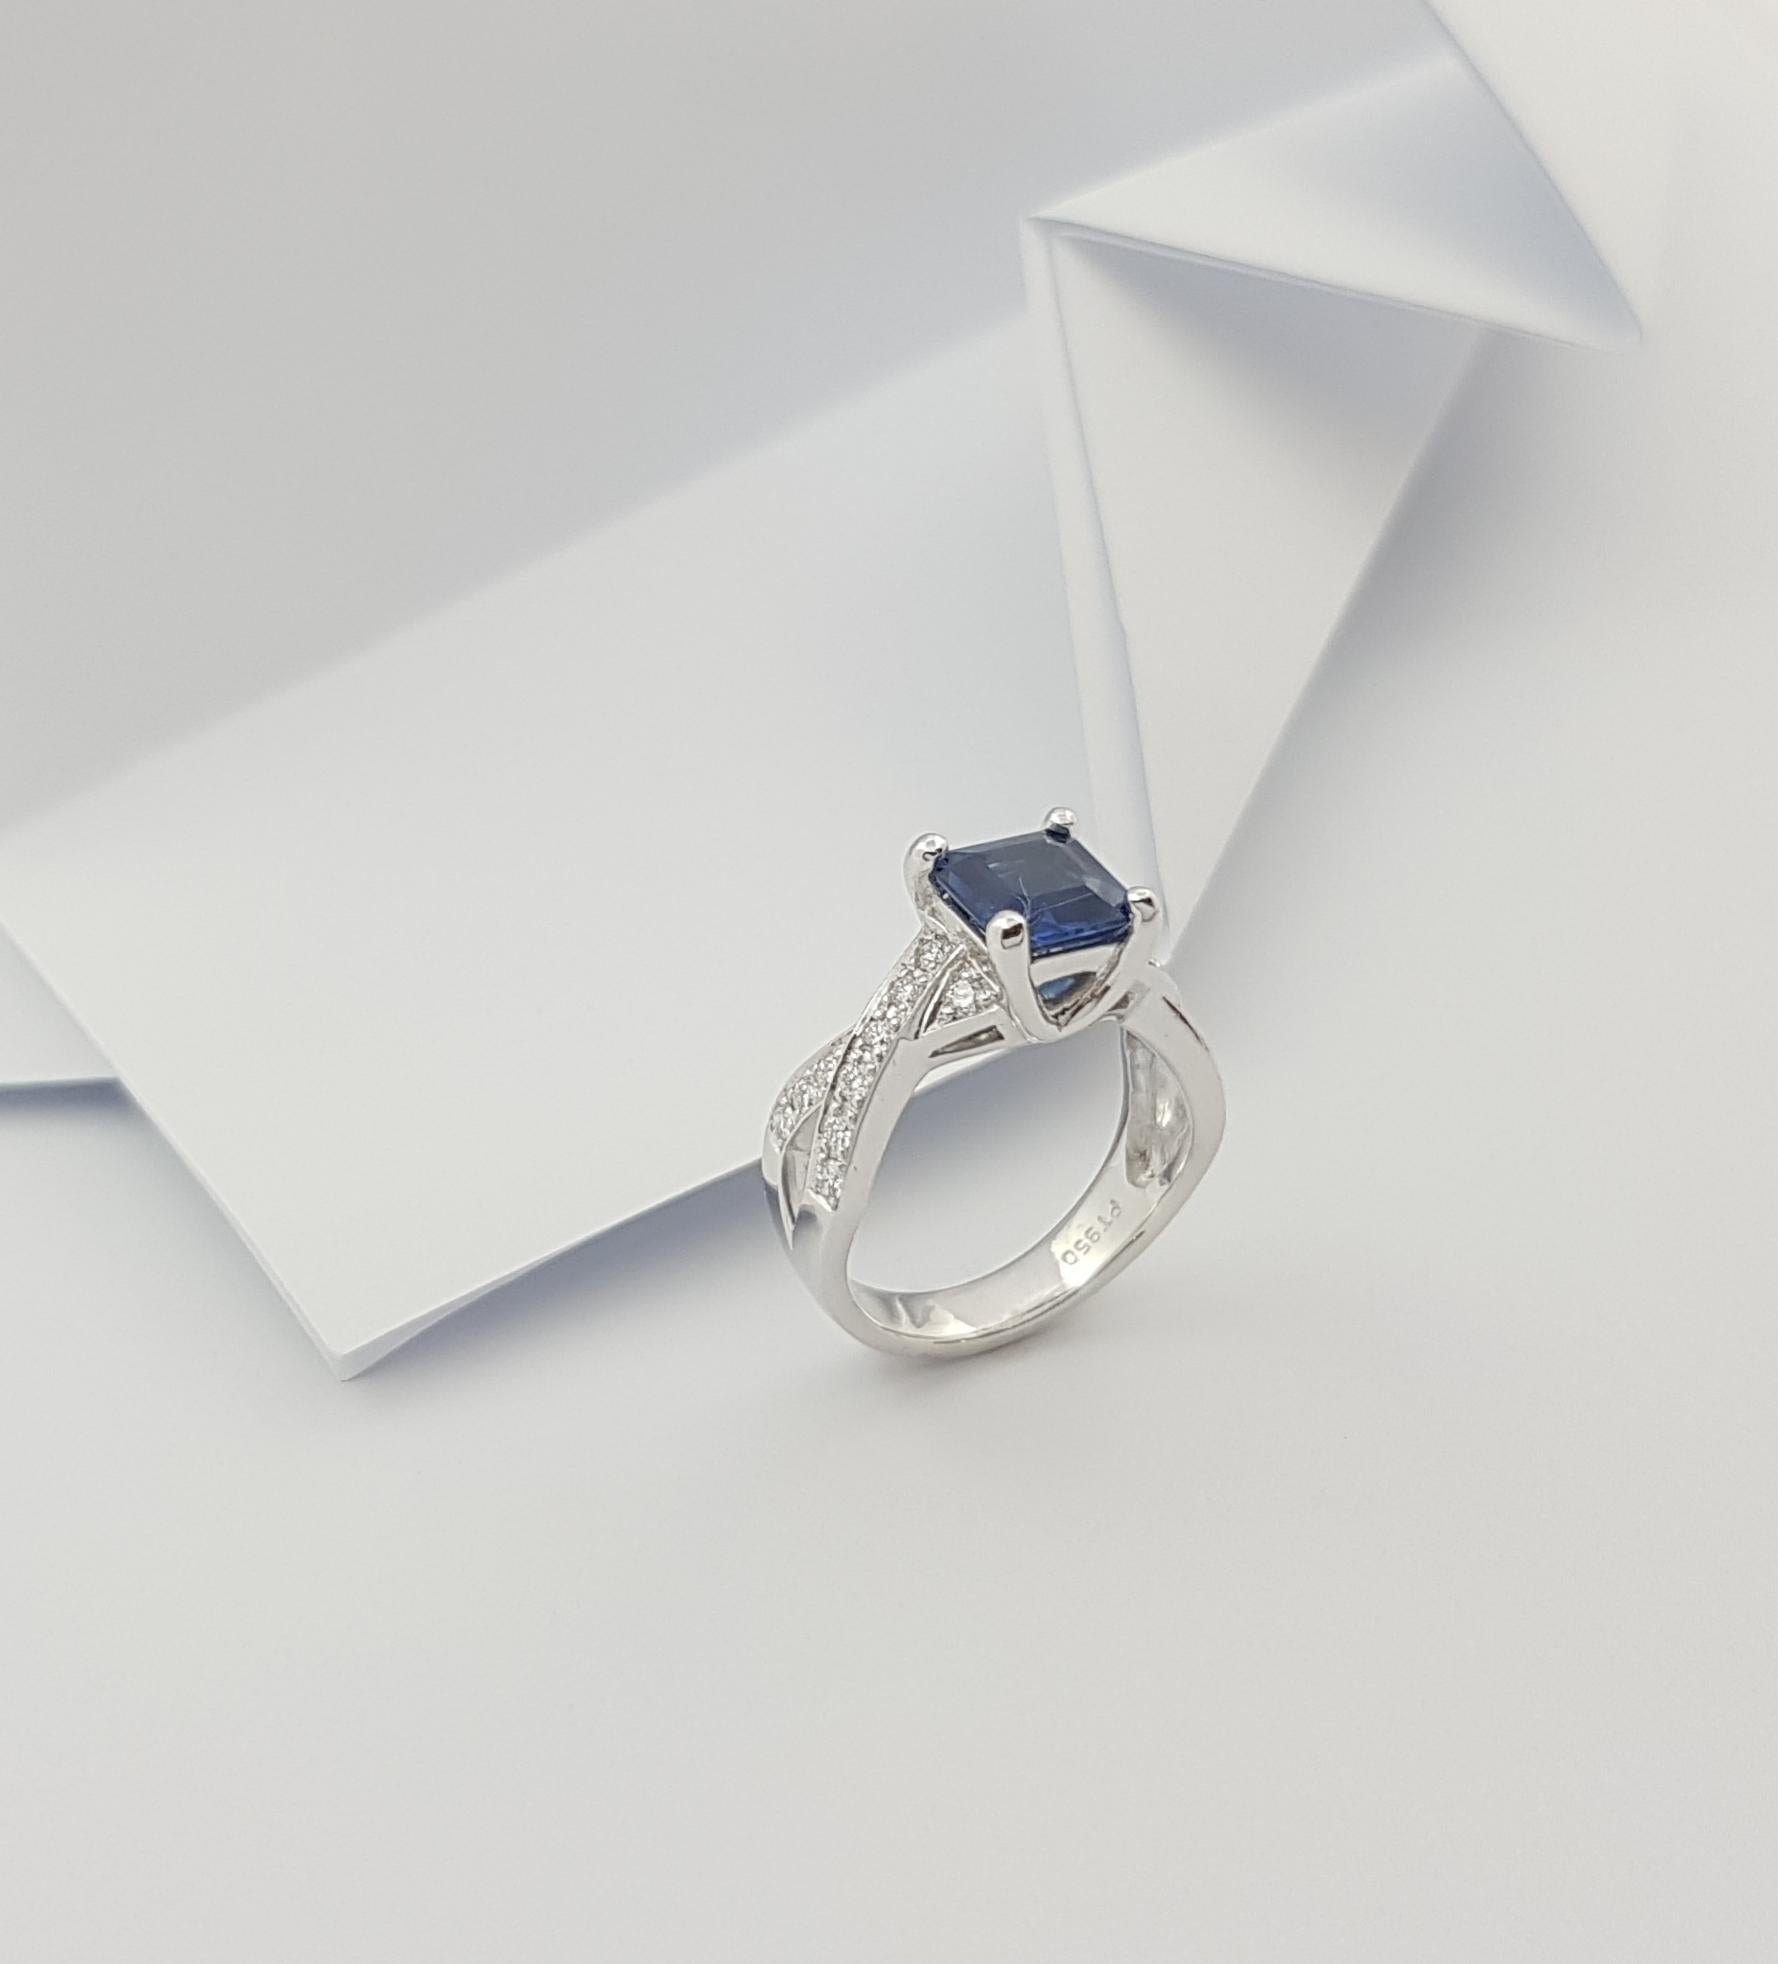 Certified Burmese Blue Sapphire with Diamond Ring Set in Platinum 950  For Sale 3